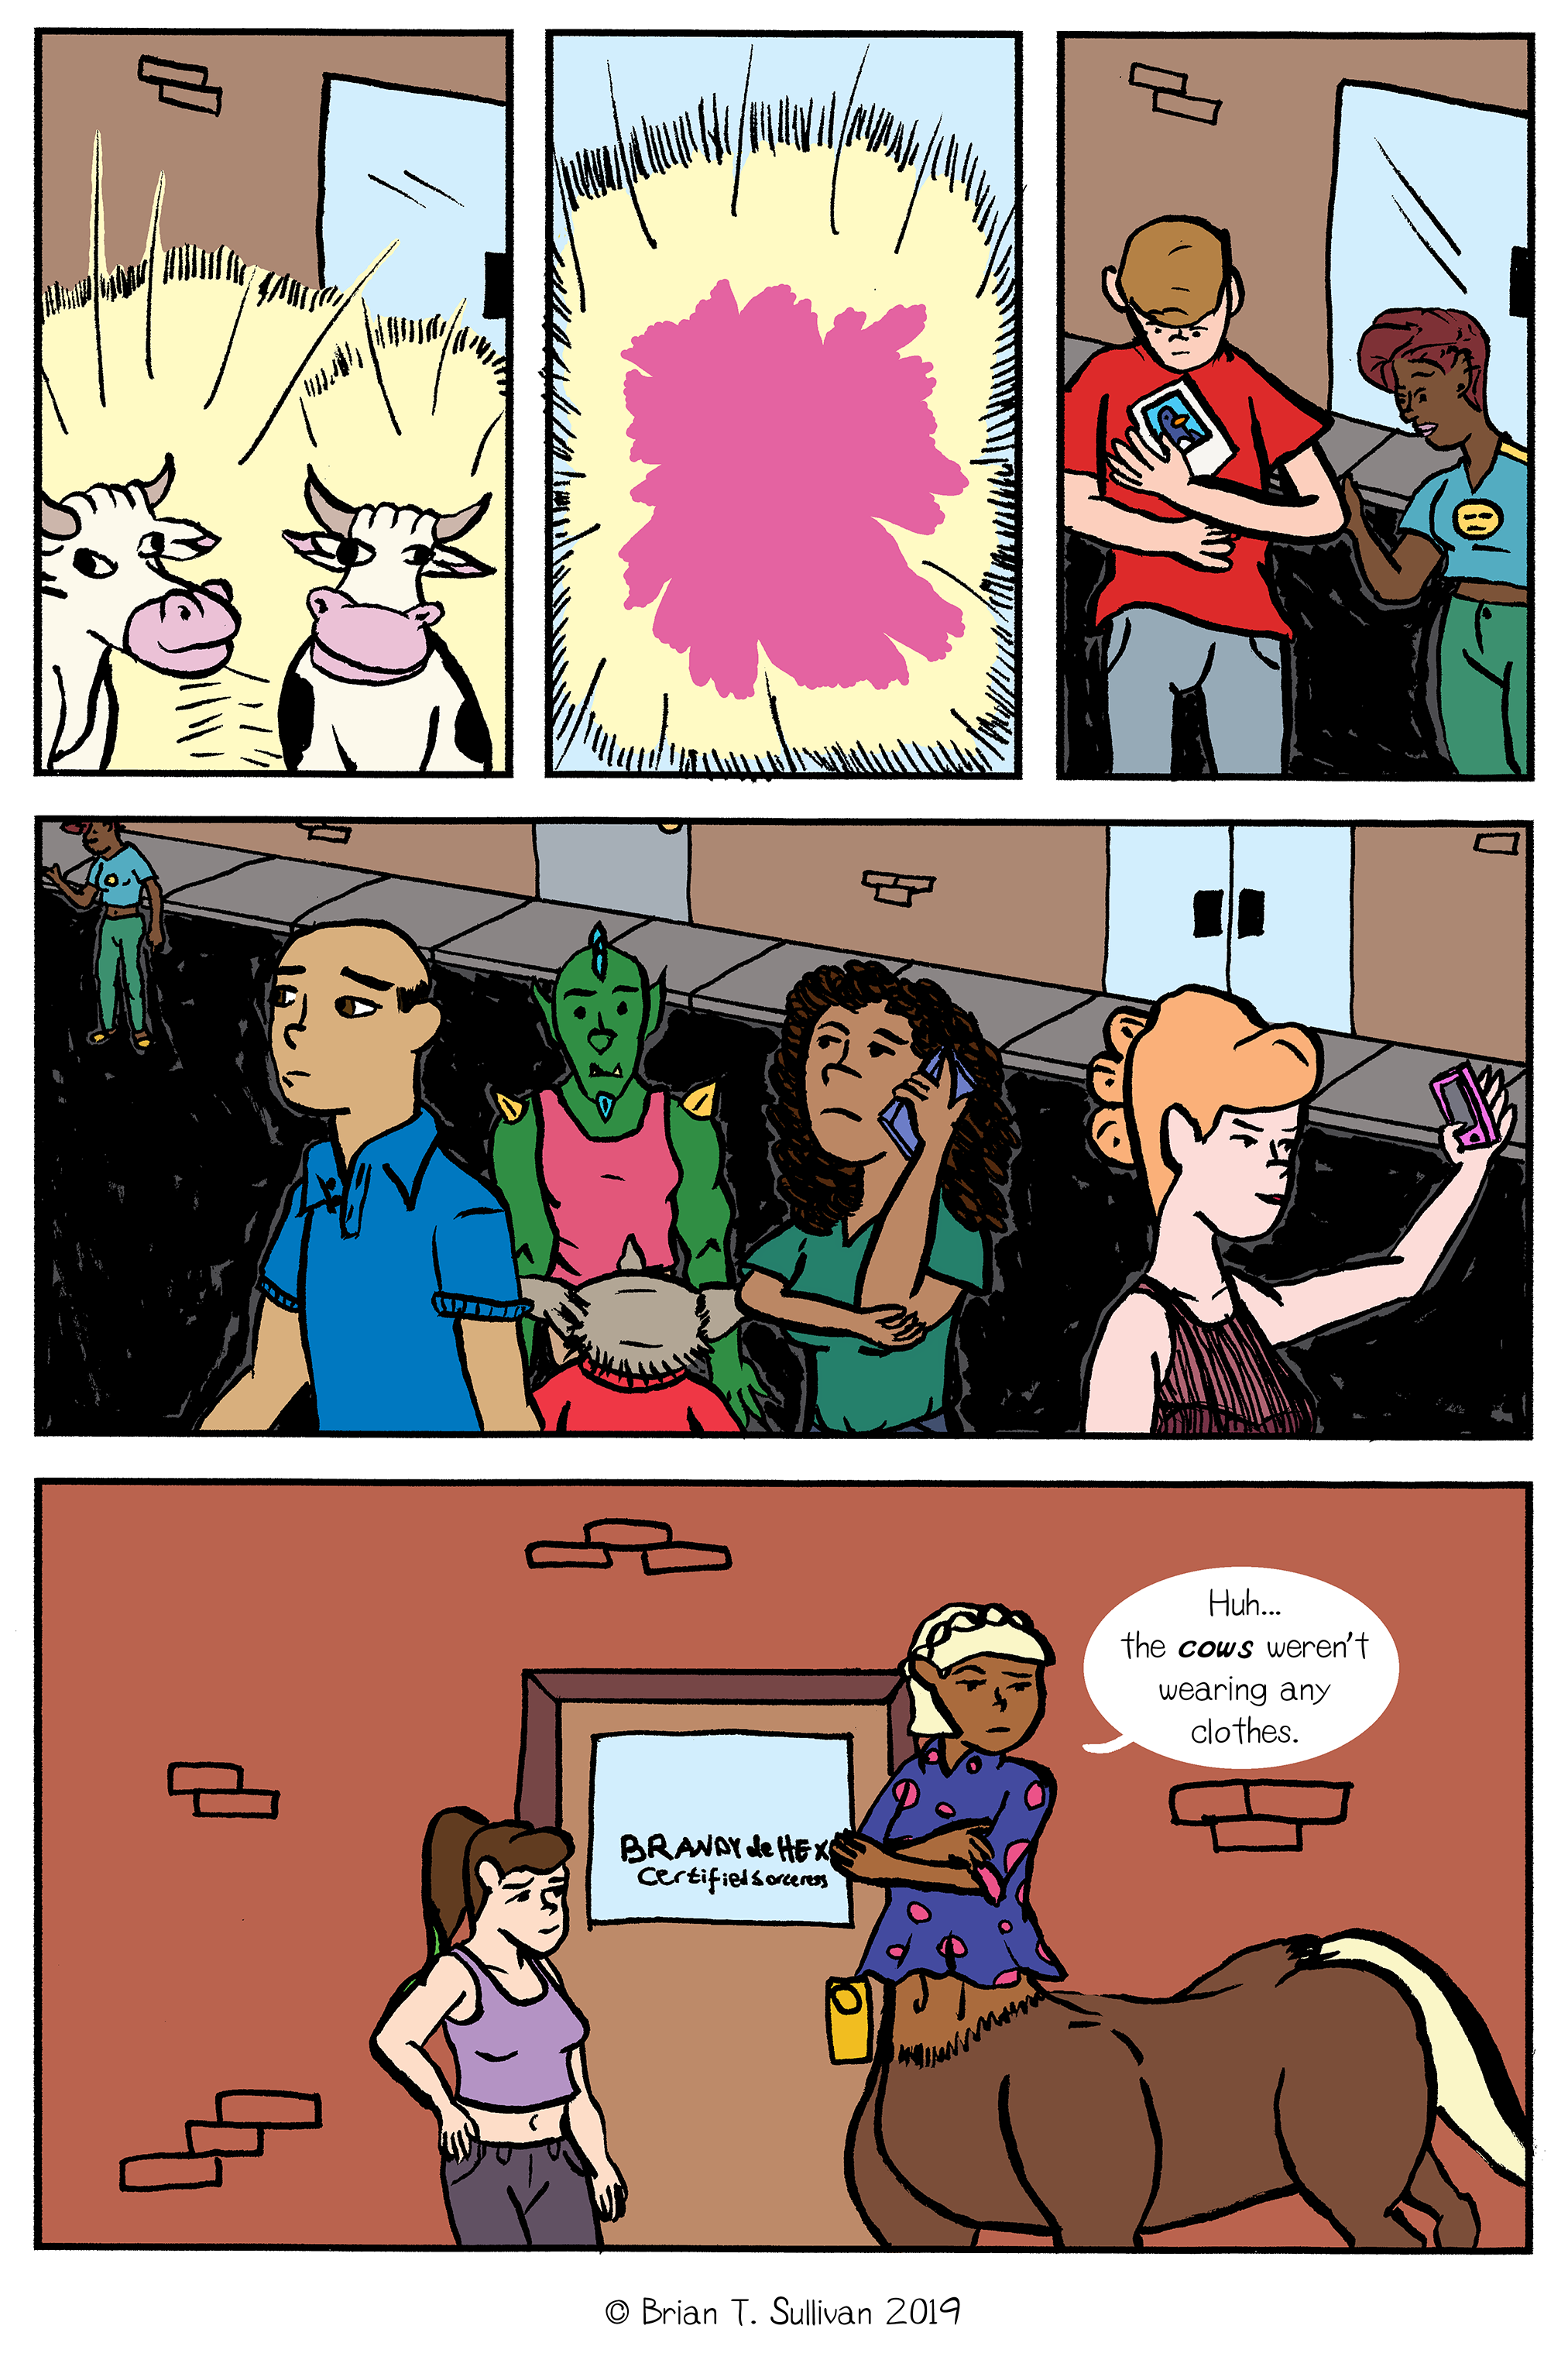 Issue 24, Page 1